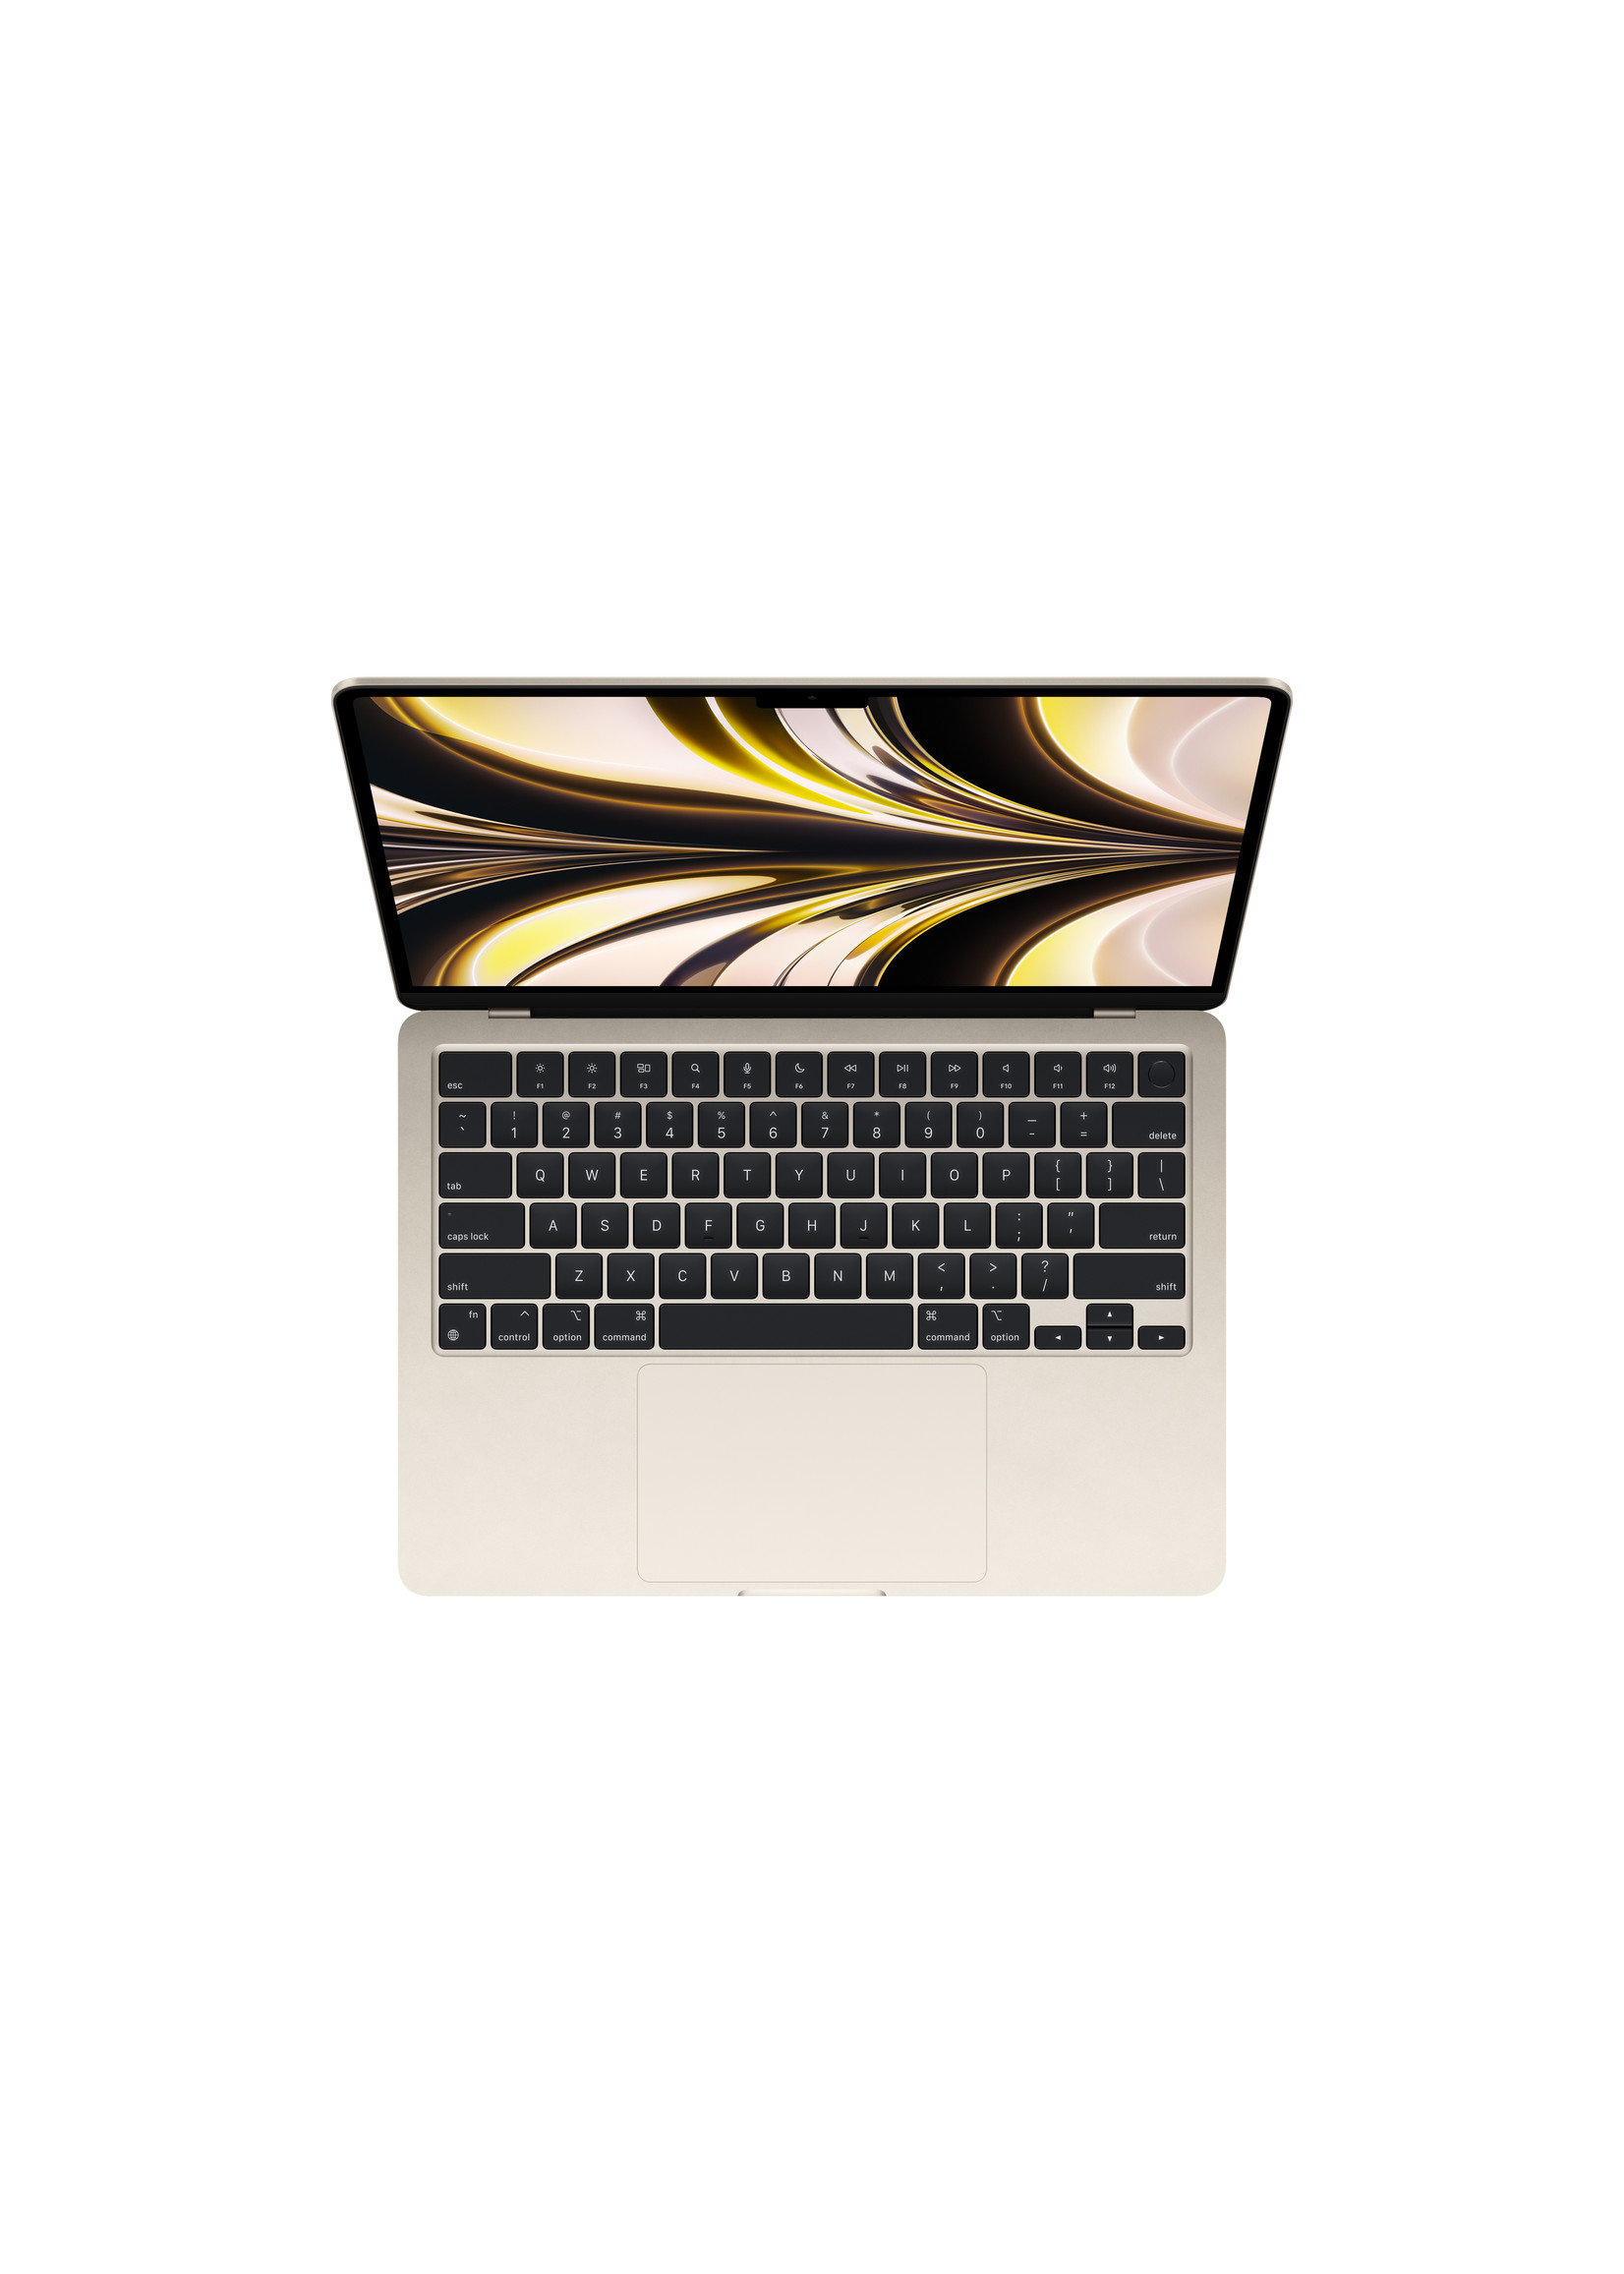 Apple 13-inch MacBook Air: Apple M2 chip with 8-core CPU and 10-core GPU,  512GB - Starlight